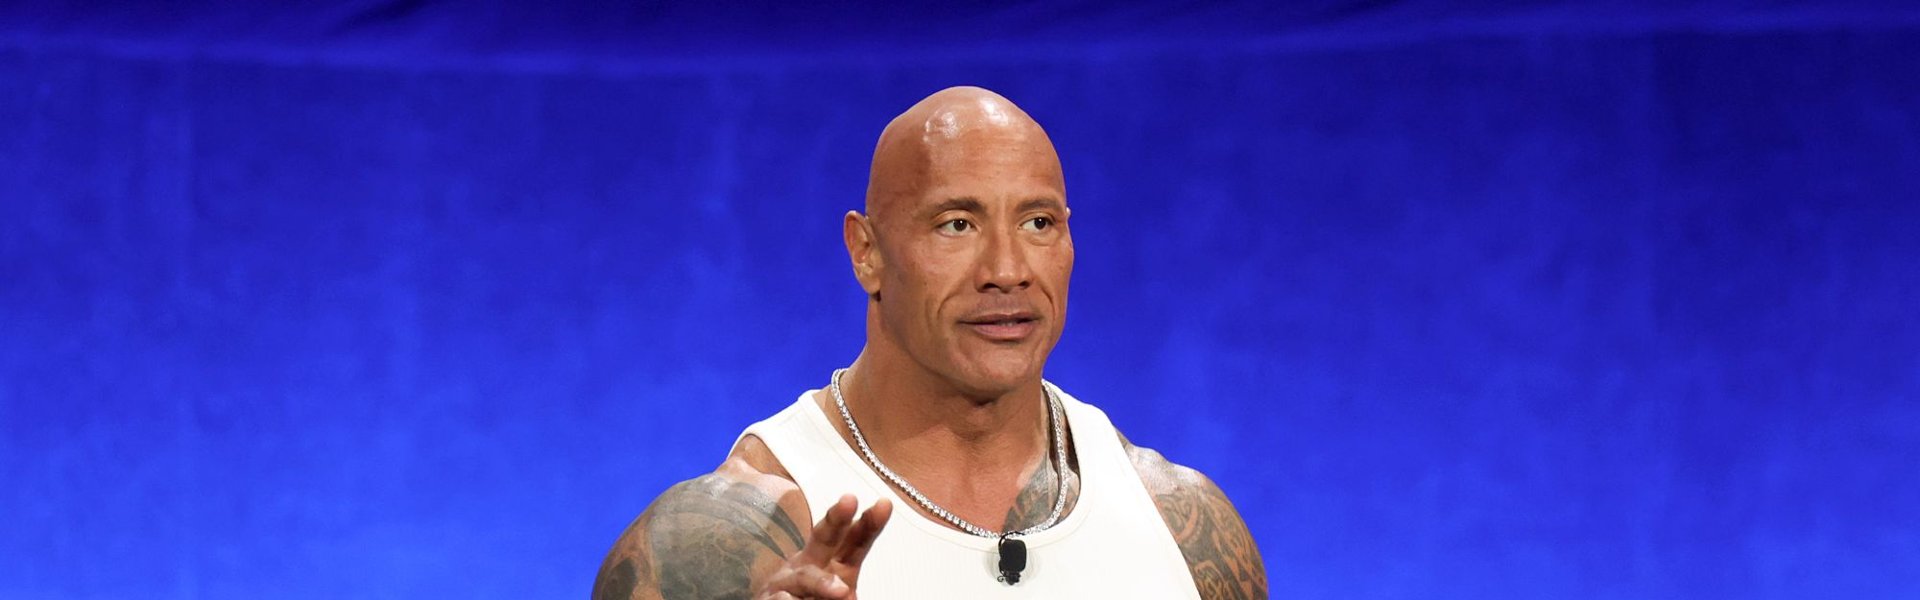 250 million for a Christmas movie? Because Dwayne Johnson was starring